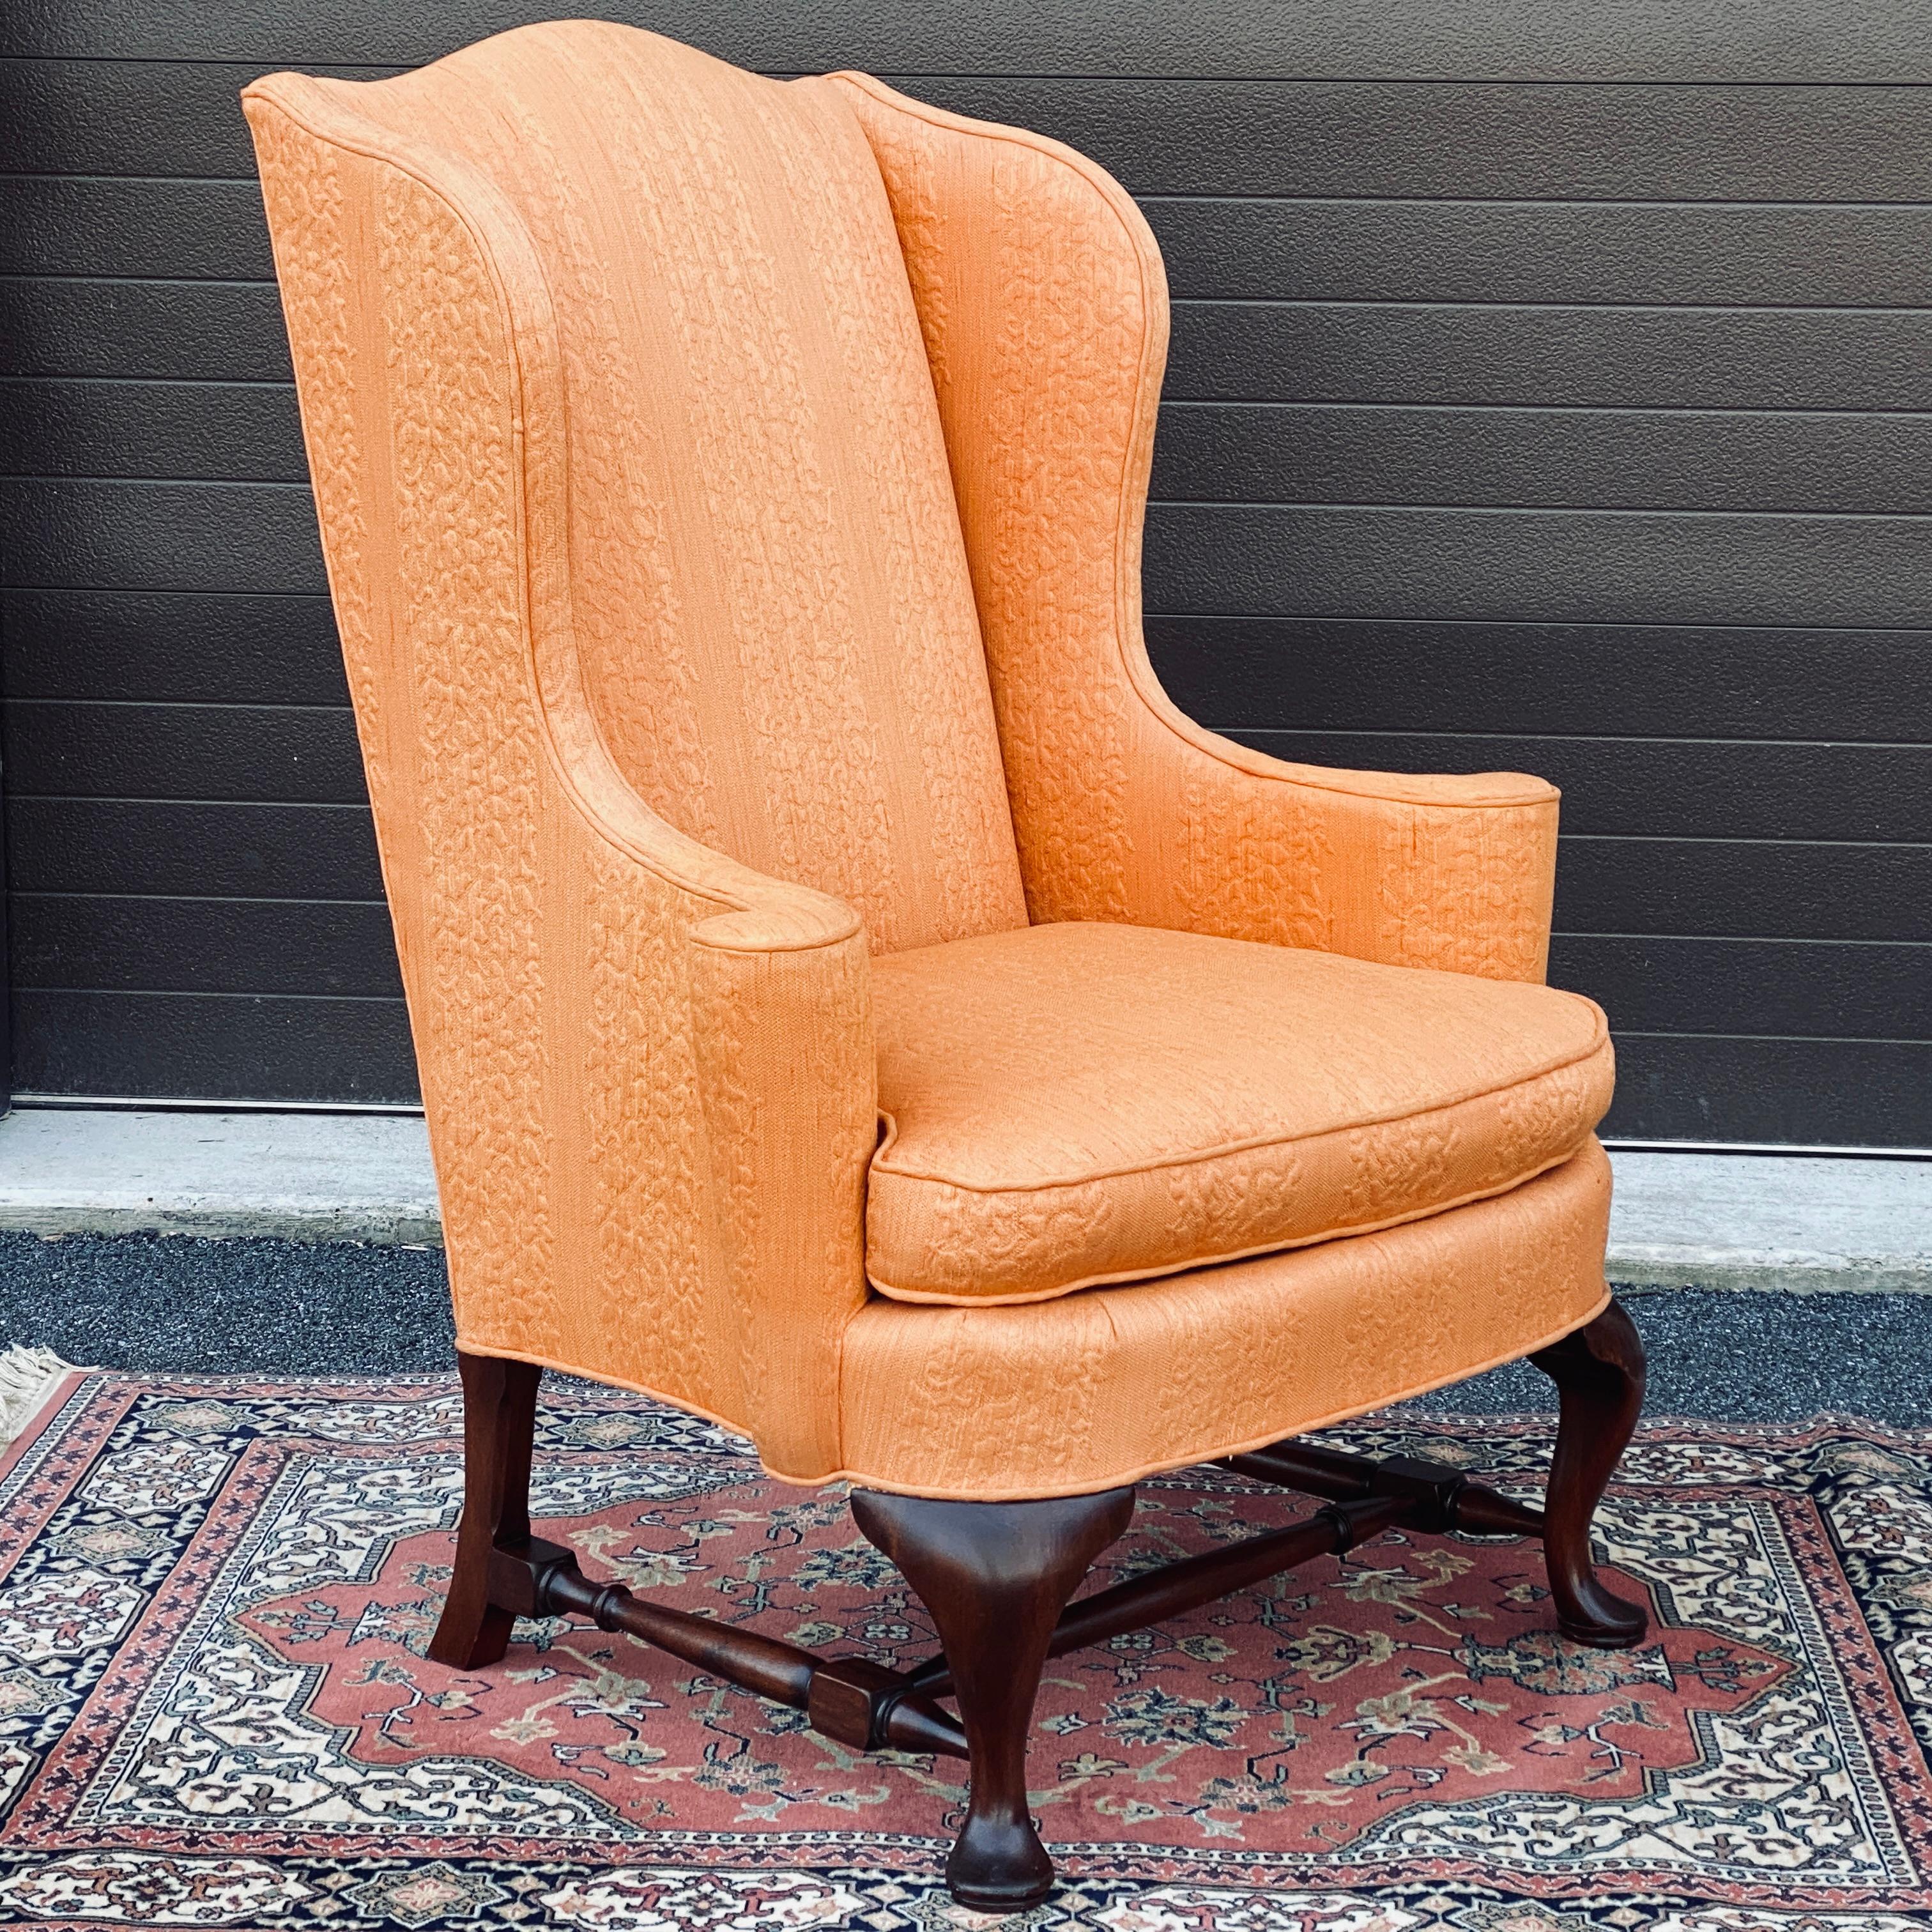 Vintage high end wingback chair from W. and J. Sloane Inc. Fifth Avenue New York, N.Y. with the original orange jacquard upholstery and solid mahogany legs with stretchers. Spring down and feather seat.